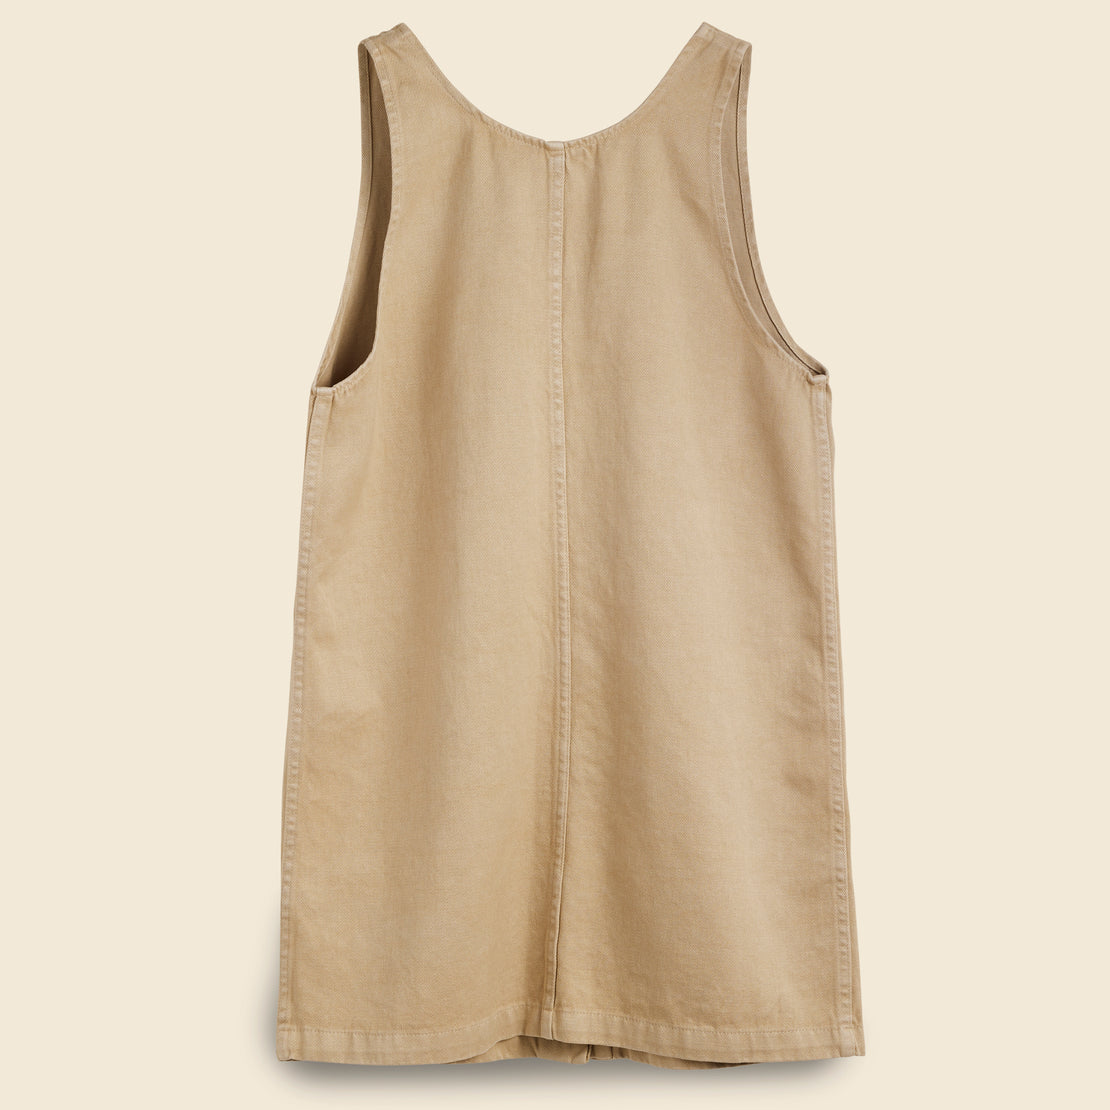 Jumper Dress - Canvas - Jungmaven - STAG Provisions - W - Onepiece - Dress